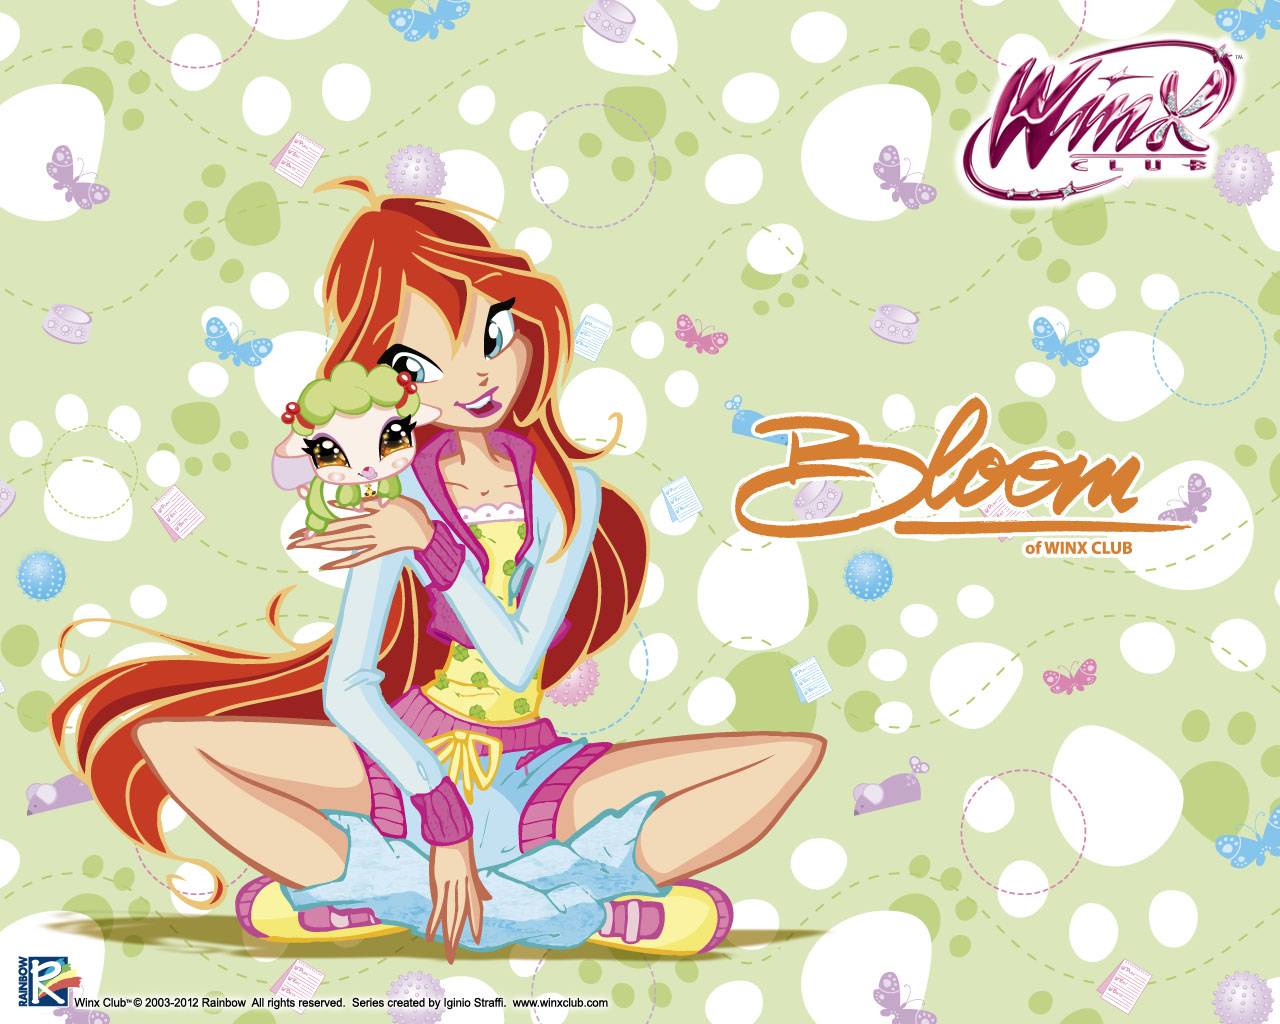 bloom and her pet winx club world Wallpaper